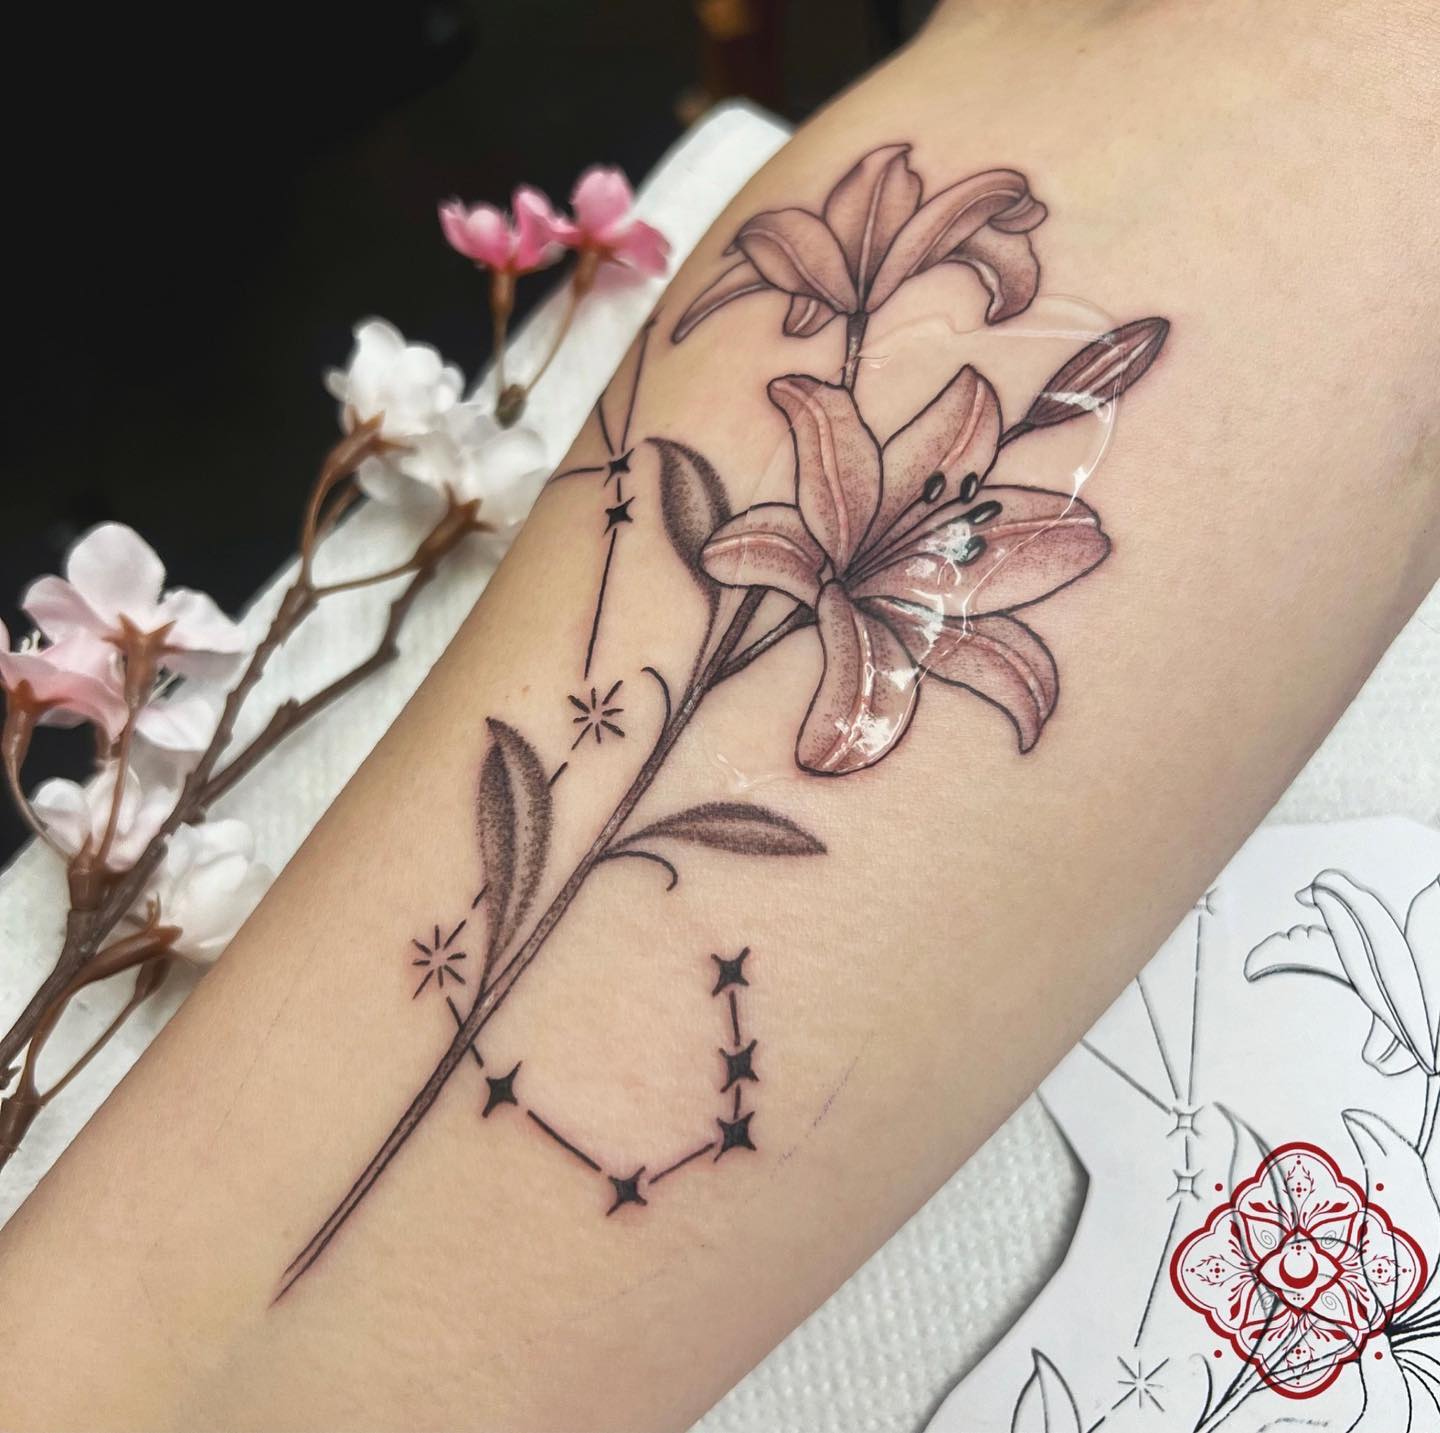 Lilies + Scorpio constellation ♏️🫶🏻
Thanks dear Denise Swift! 🤍
Done at studioxiiigallery 
•
•
•
•
•
•
•
•
•
            